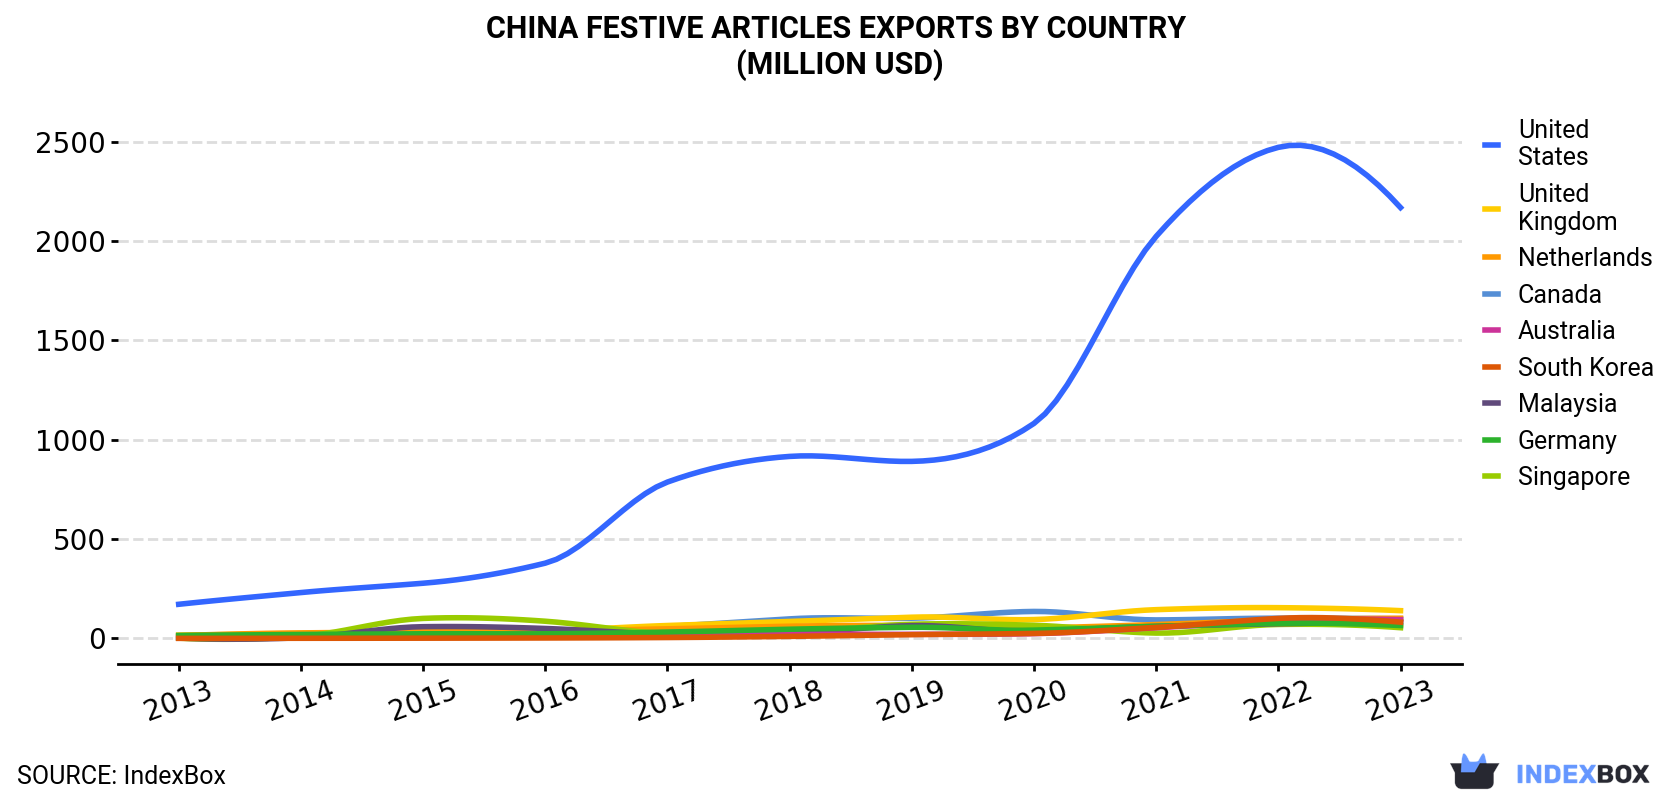 China Festive Articles Exports By Country (Million USD)